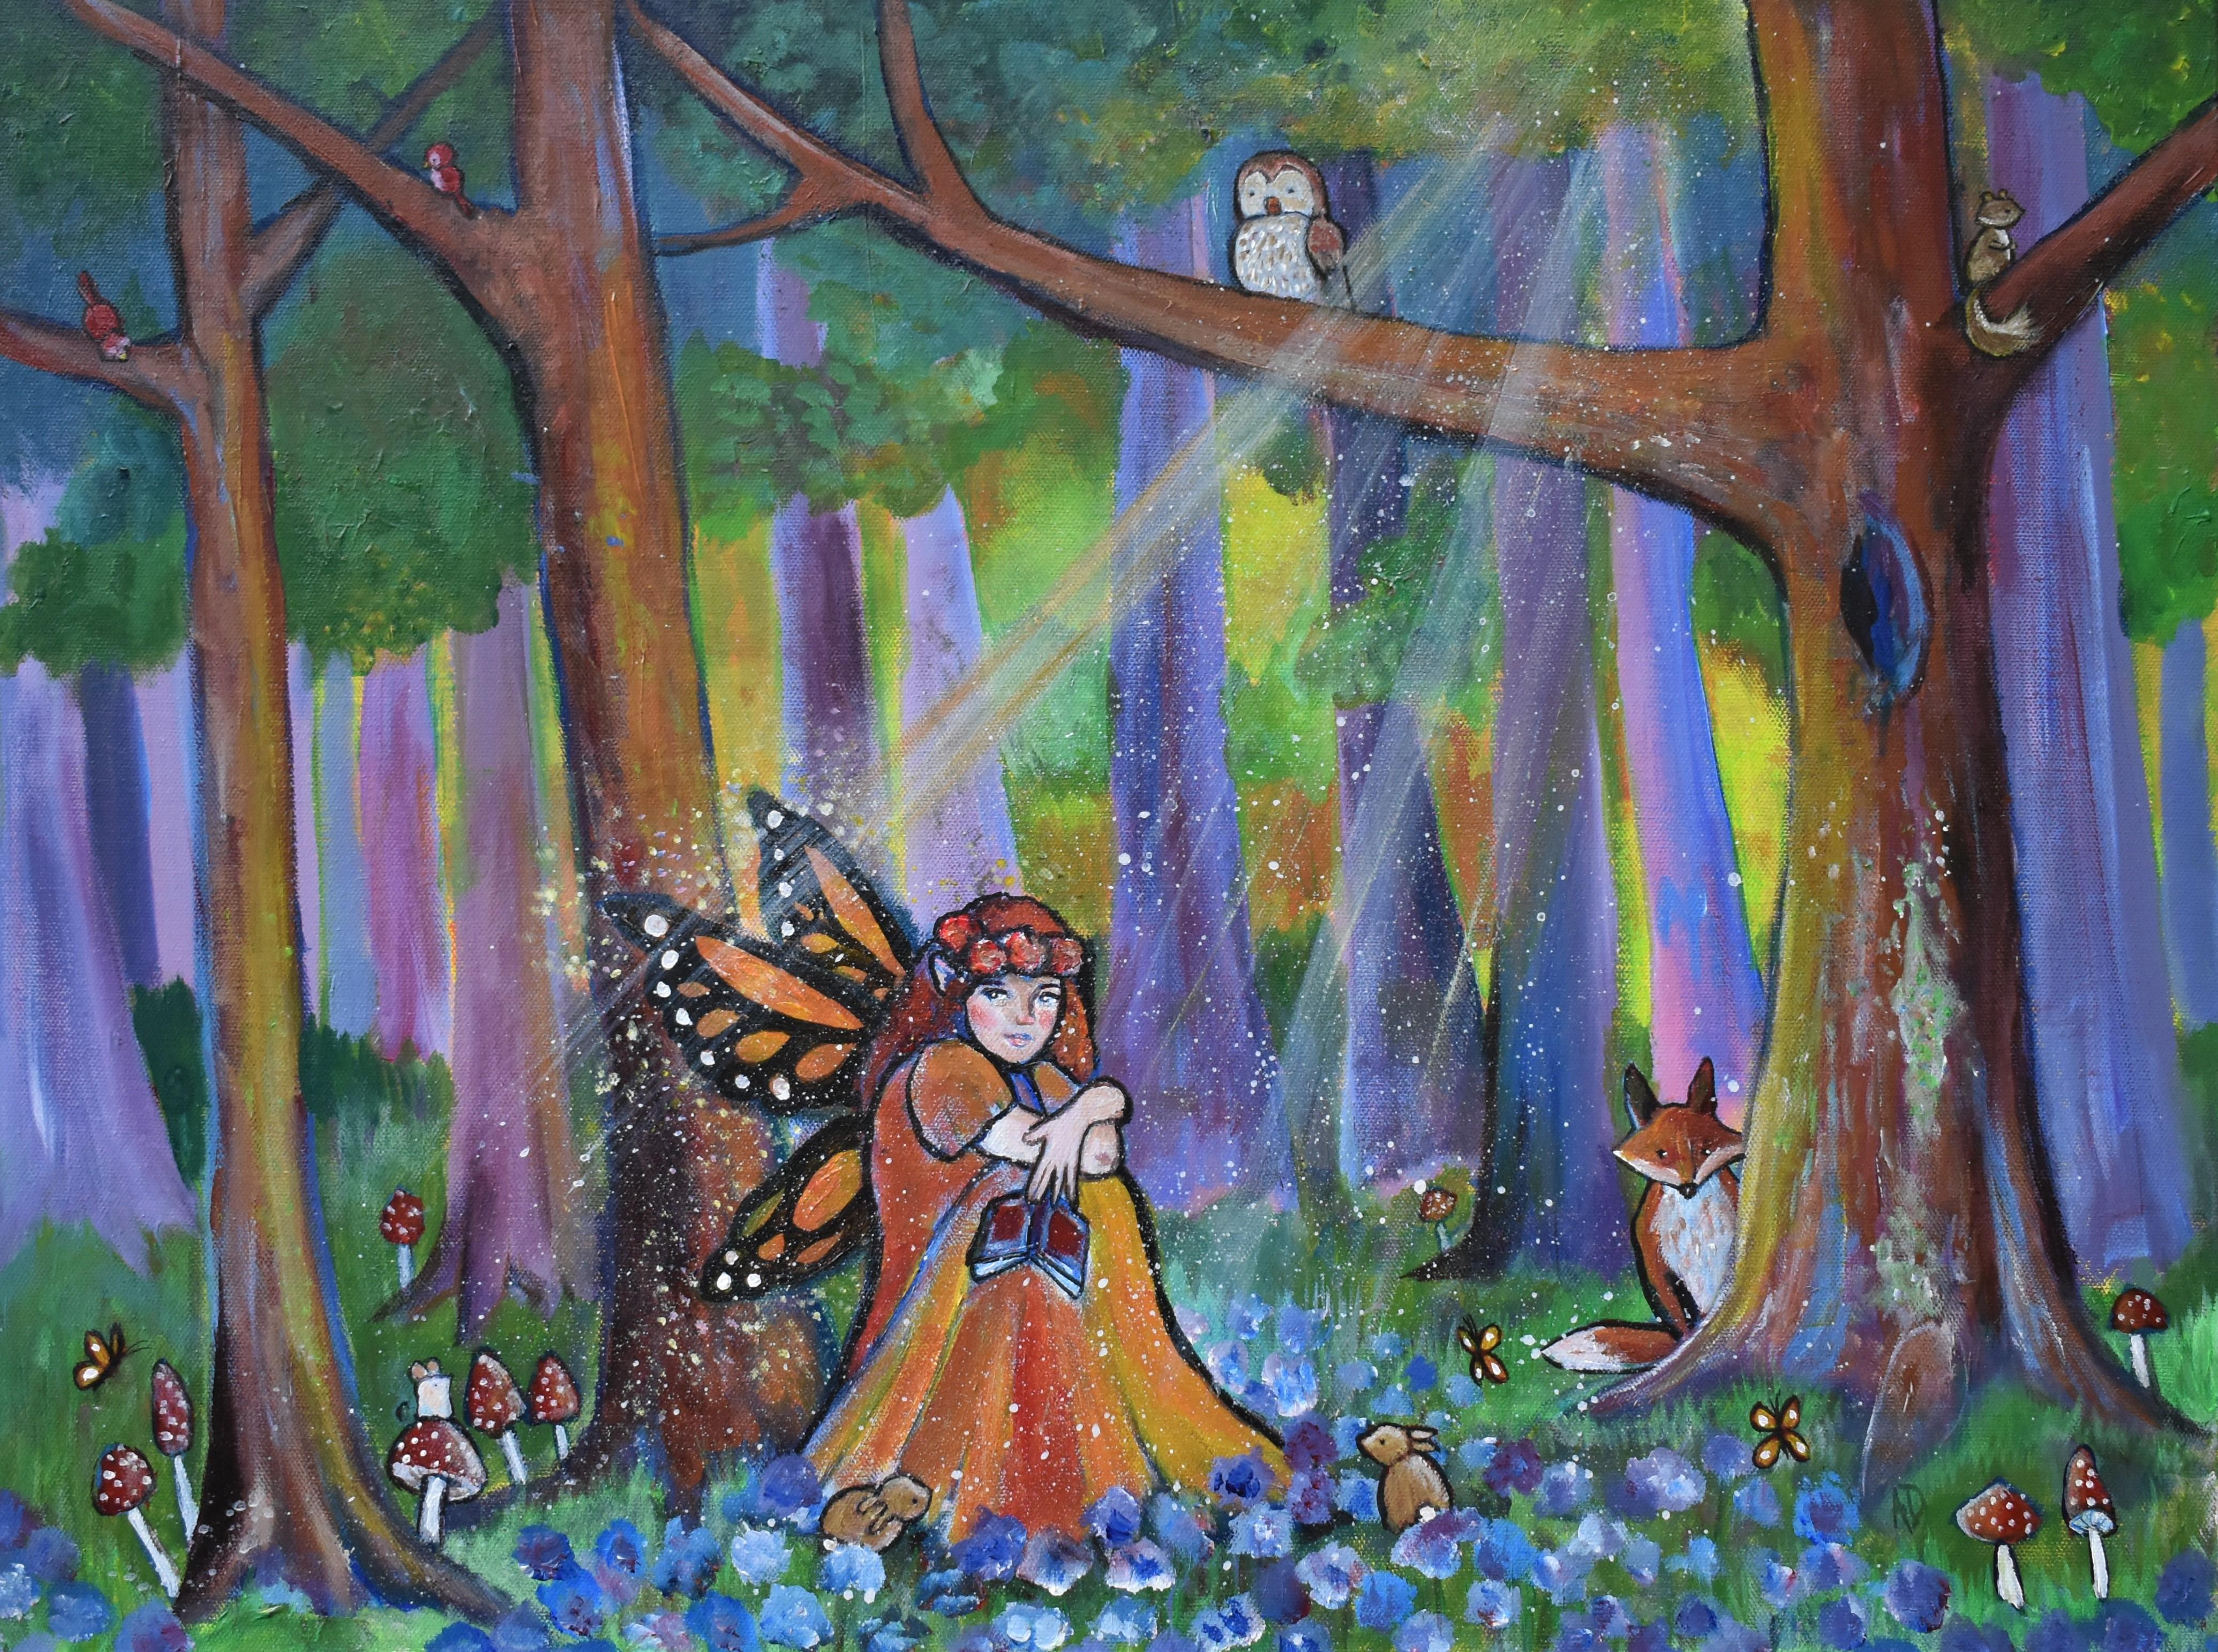 Fairy Tale, Original Painting - Art by Andrea Doss